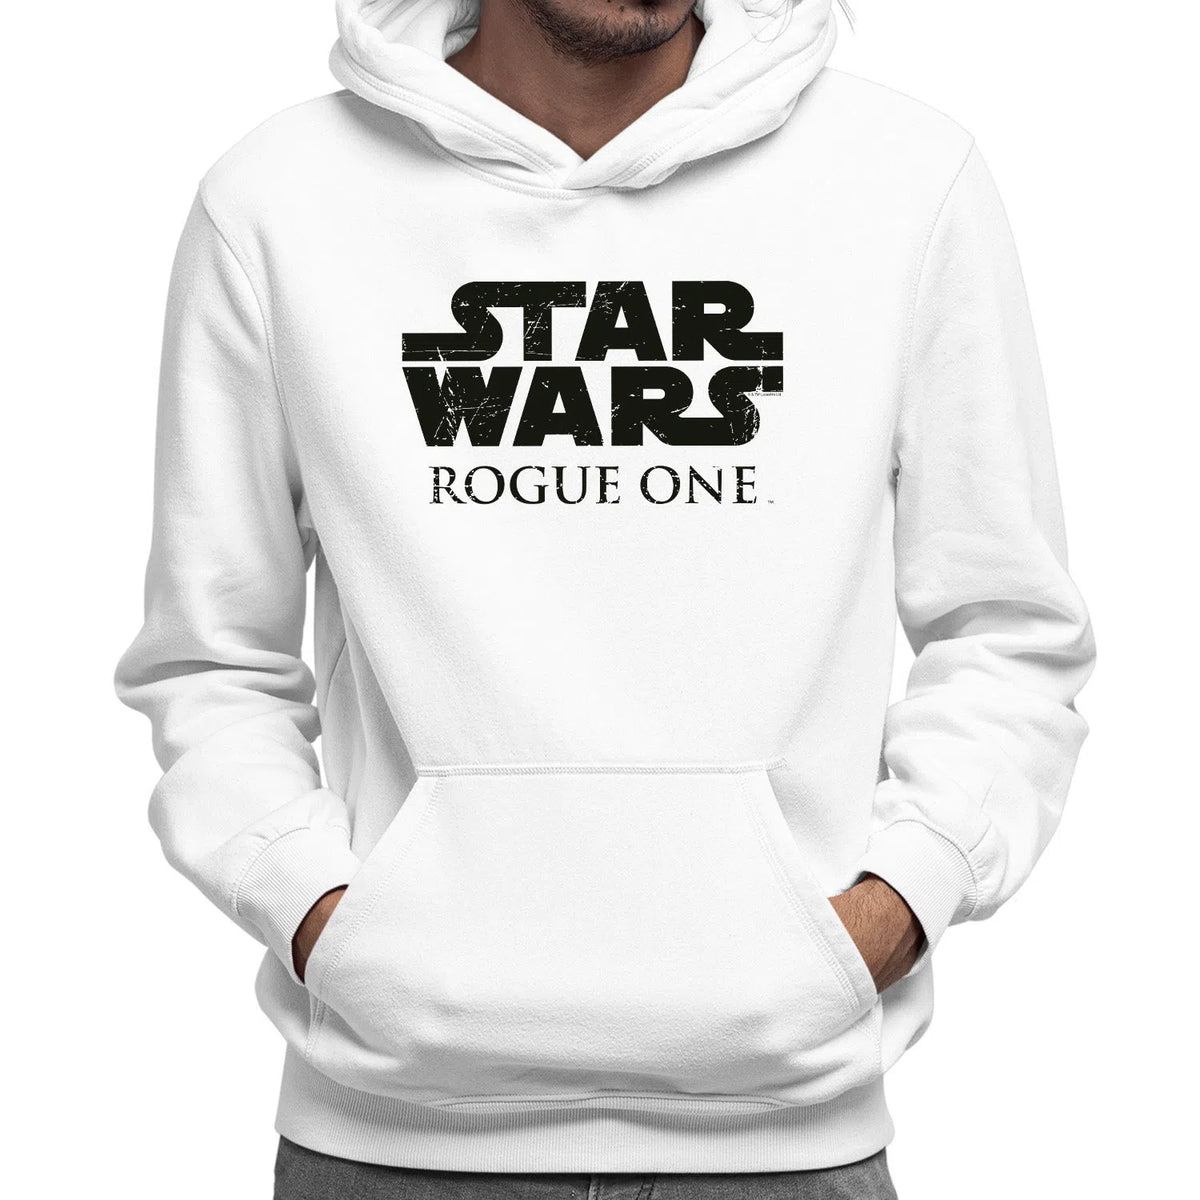 Star Wars Rogue One | Star Wars Unisex Pullover Hoodie Chroma Clothing